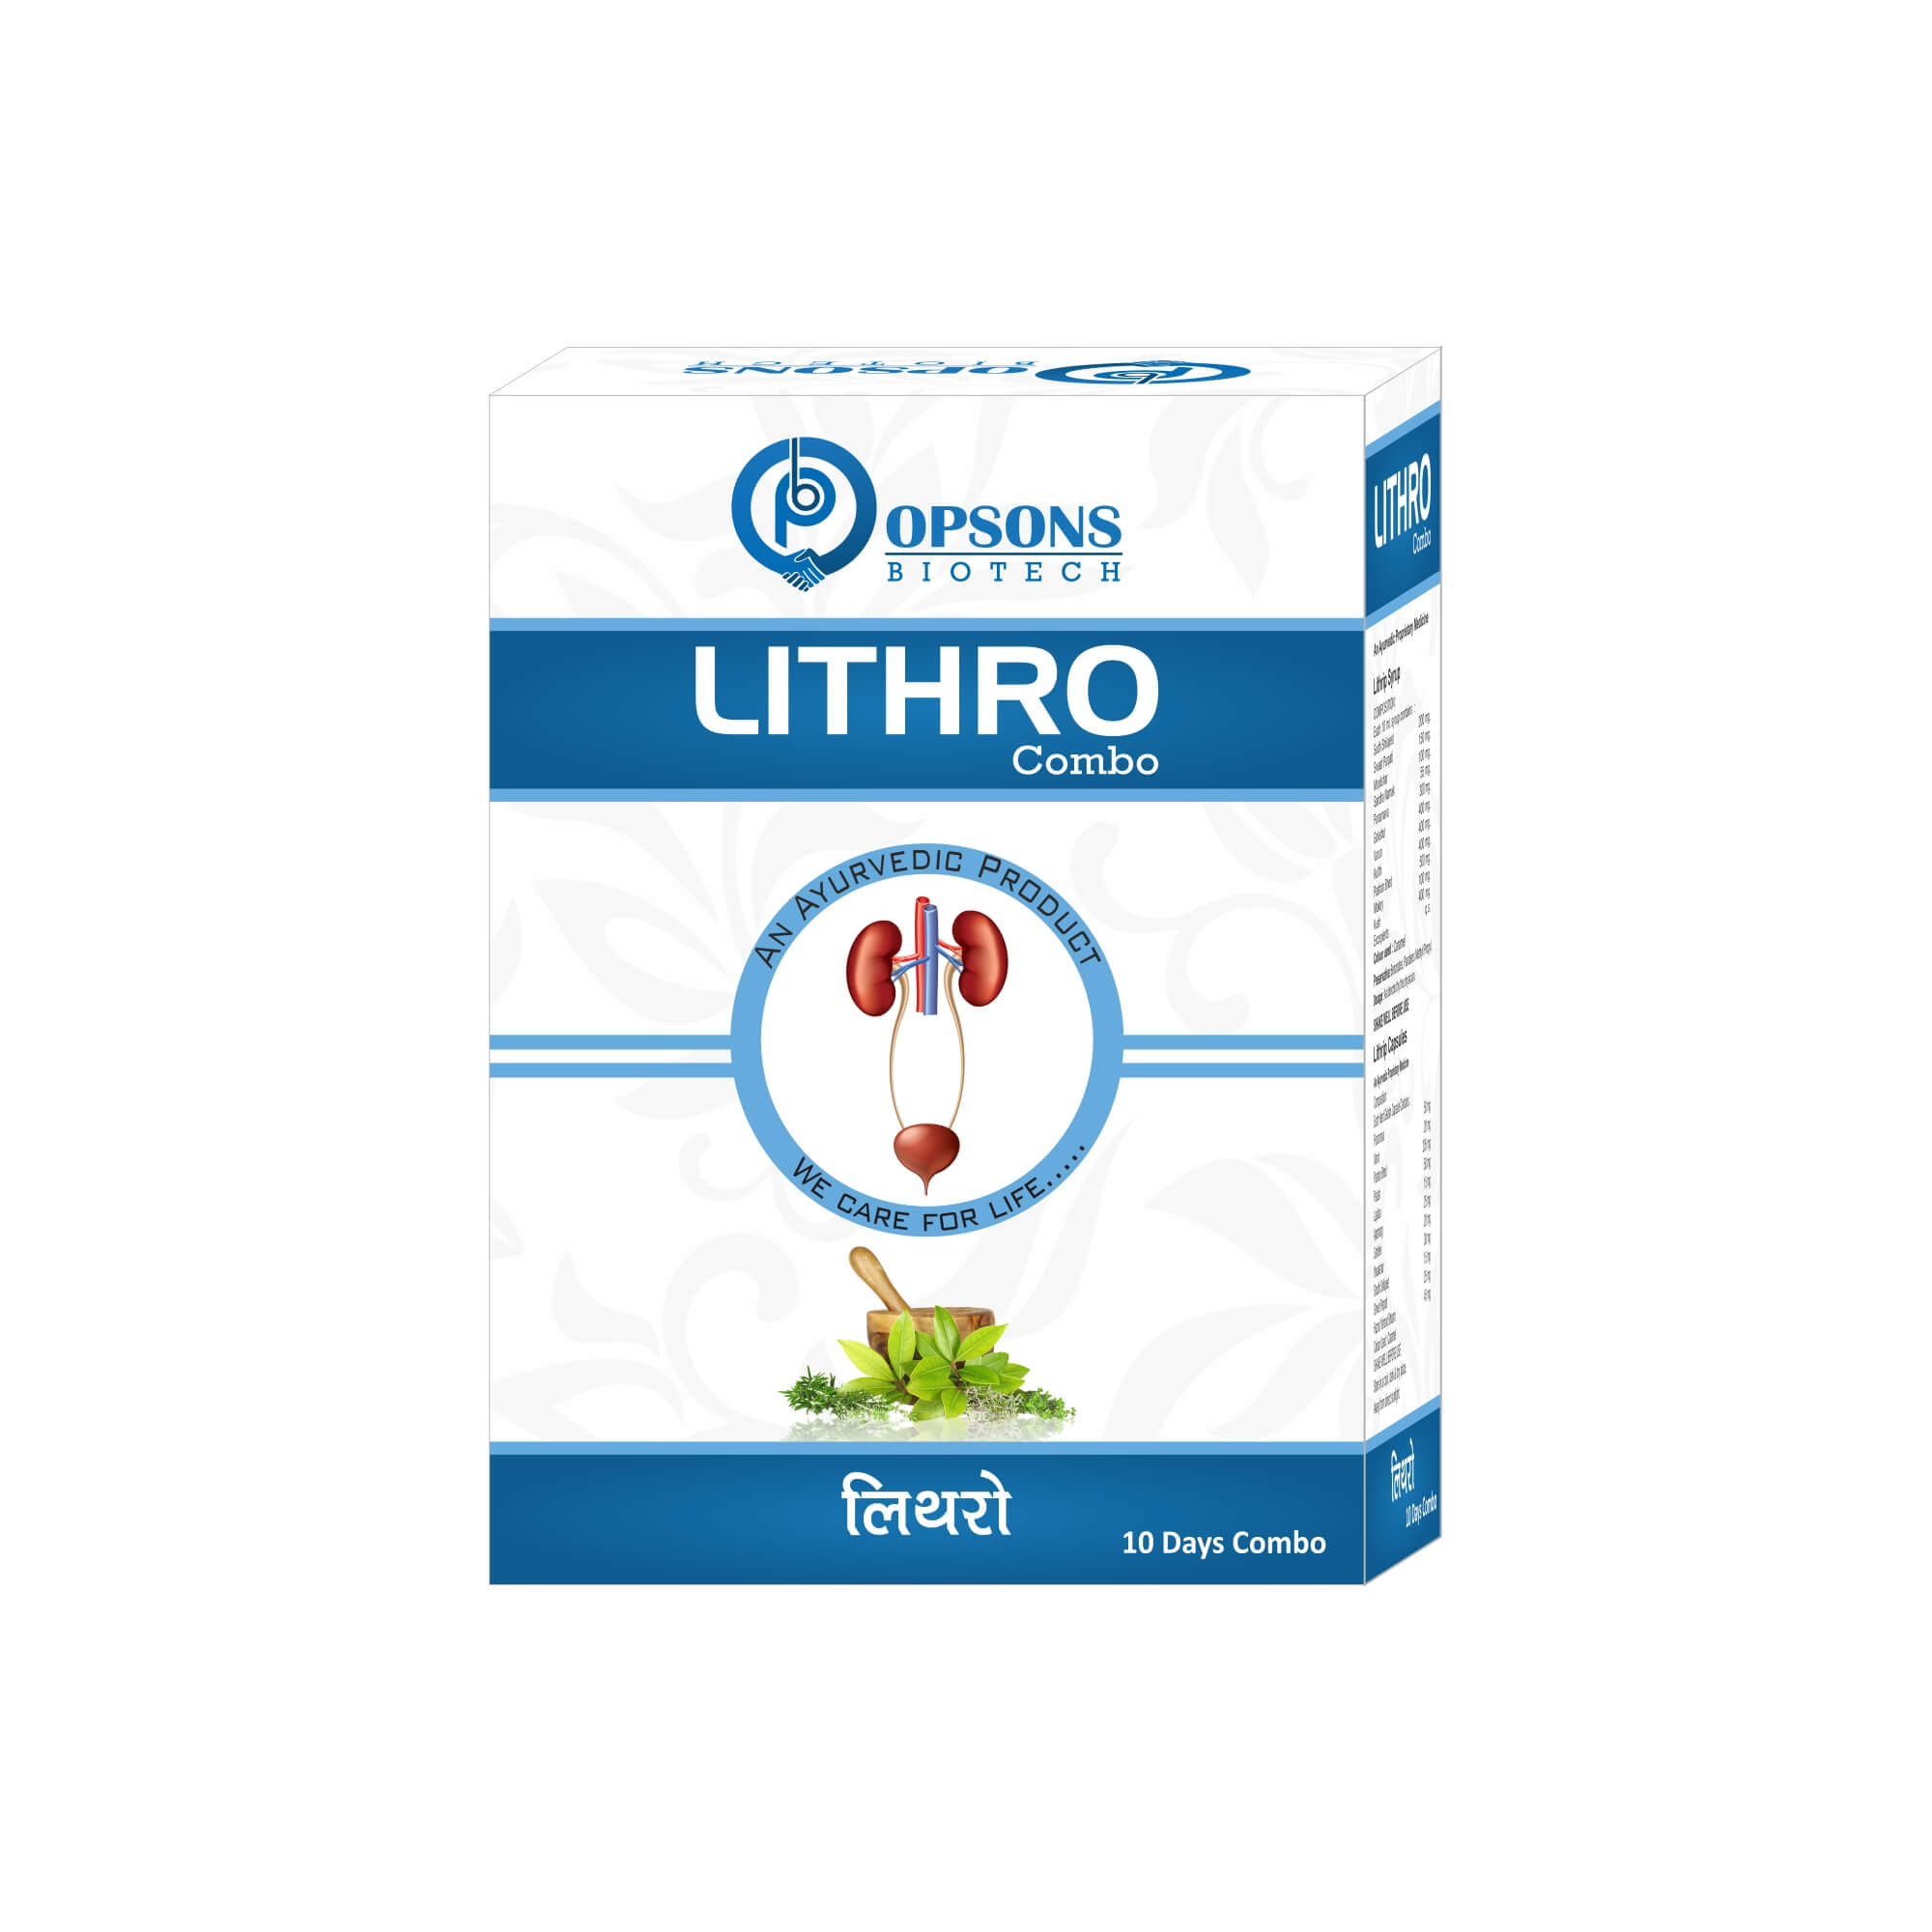 Product Name: Lithro combo, Compositions of Lithro combo are Lithro combo - Opsons Biotech